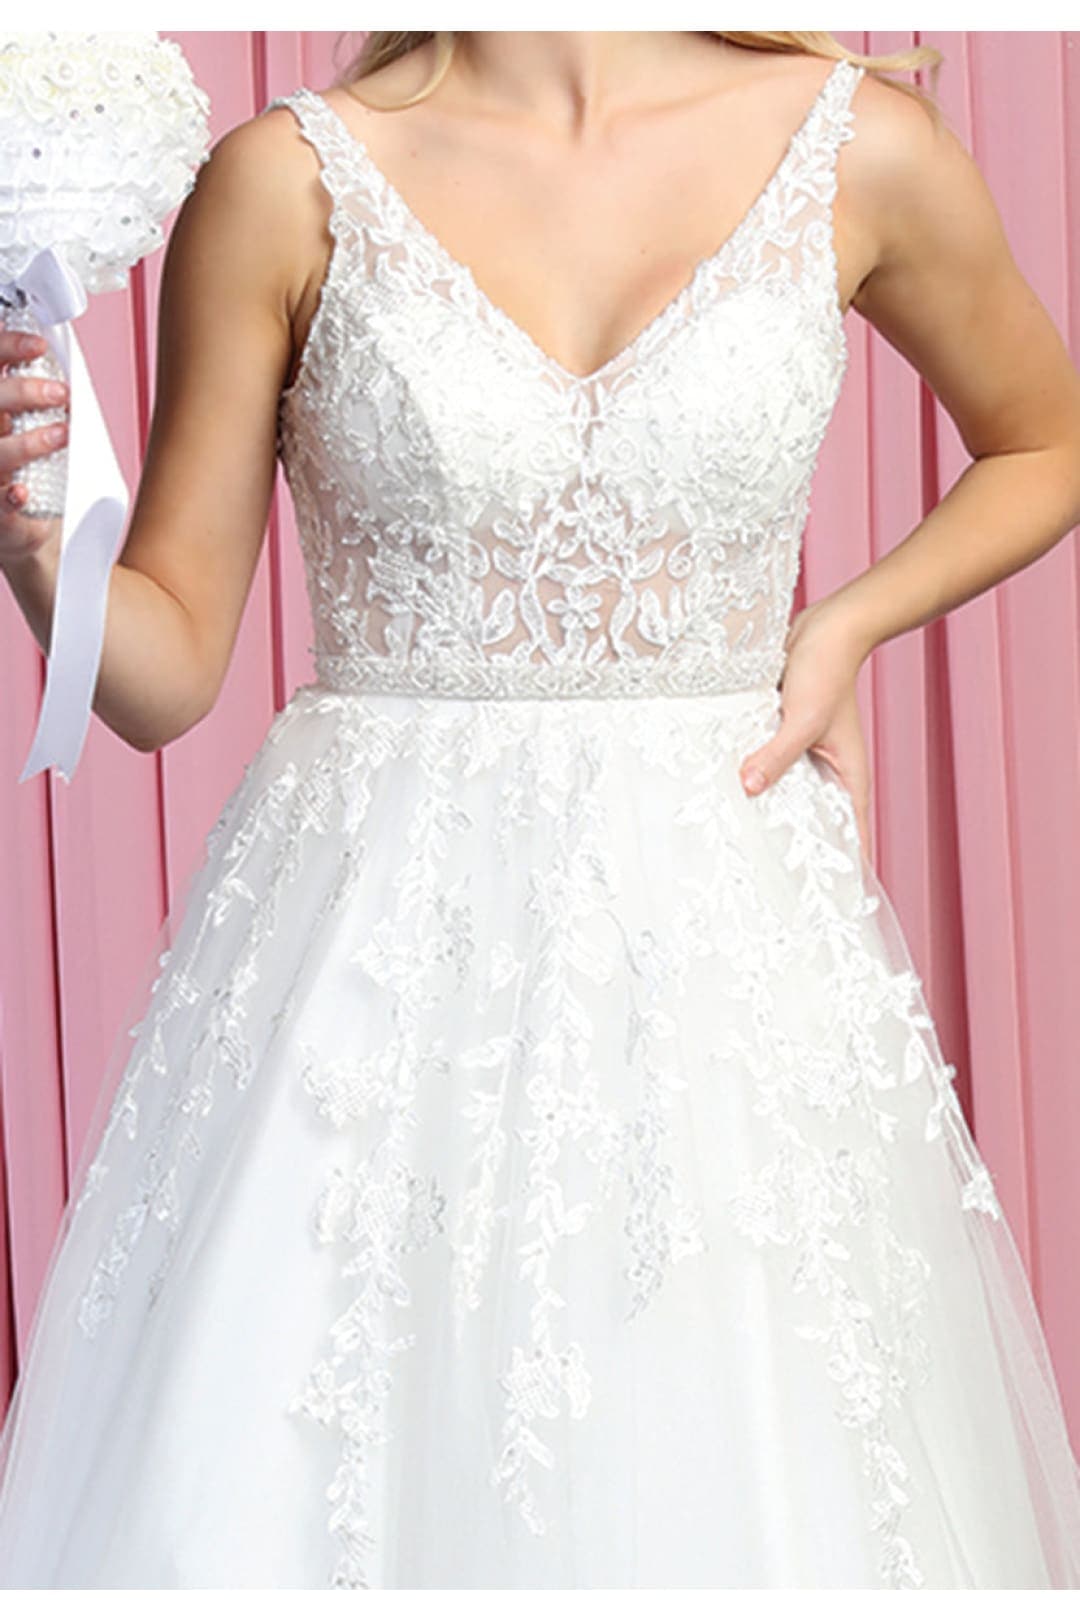 Formal Wedding Ivory Gown - Dress